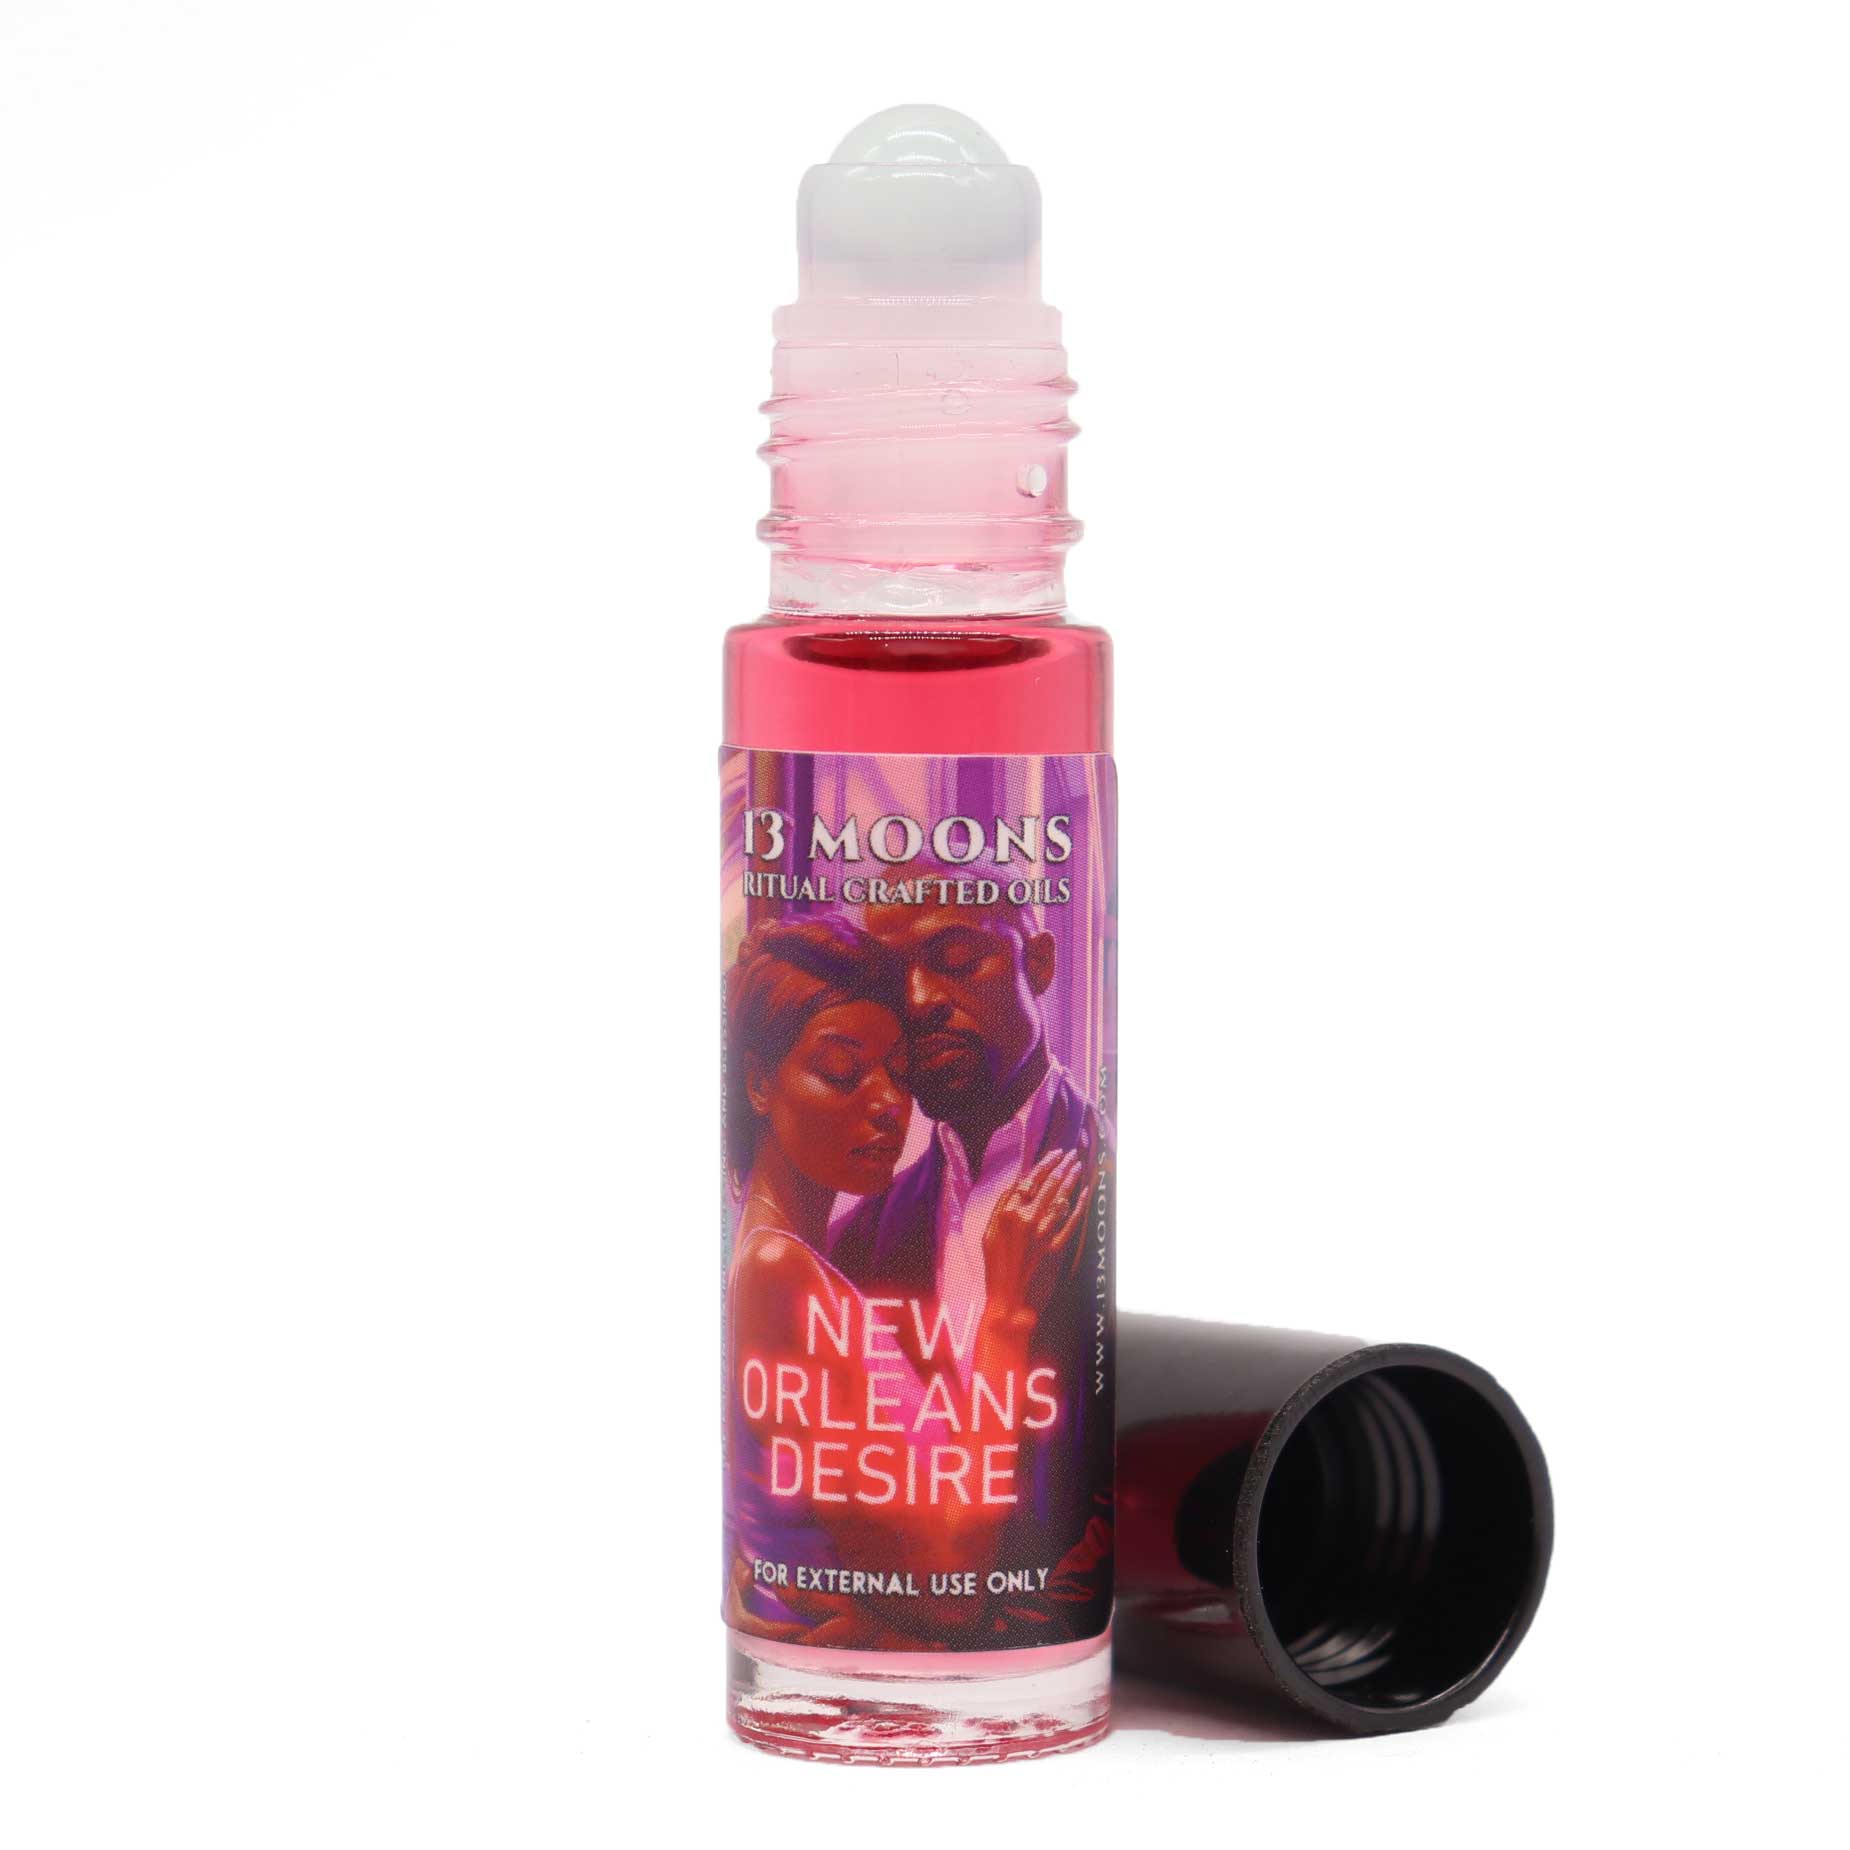 New Orleans Desire Ritual Crafted Oil by 13 Moons - 13 Moons